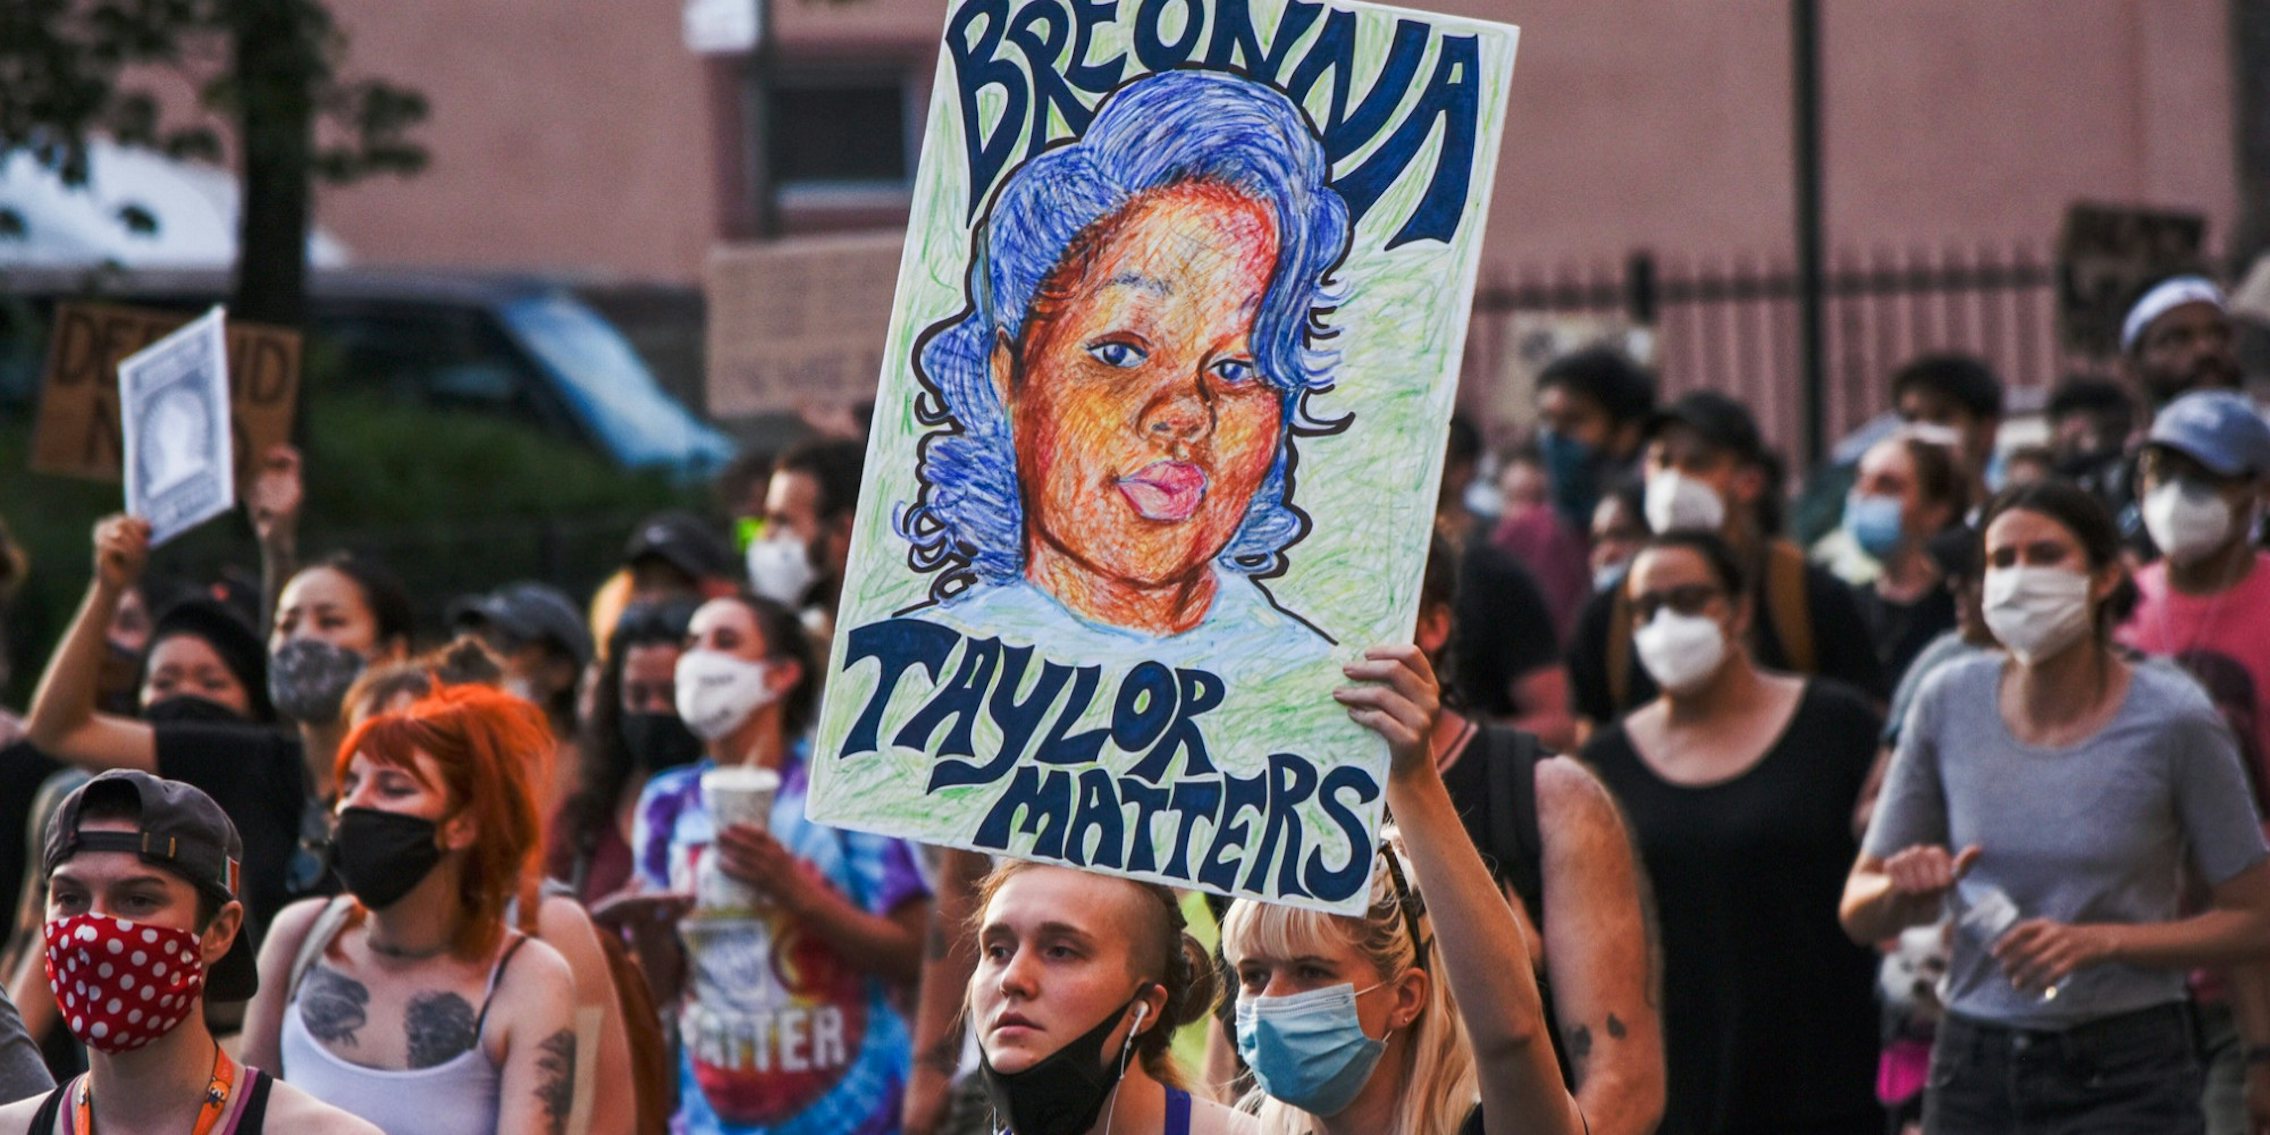 A protest sign showing Breonna Taylor